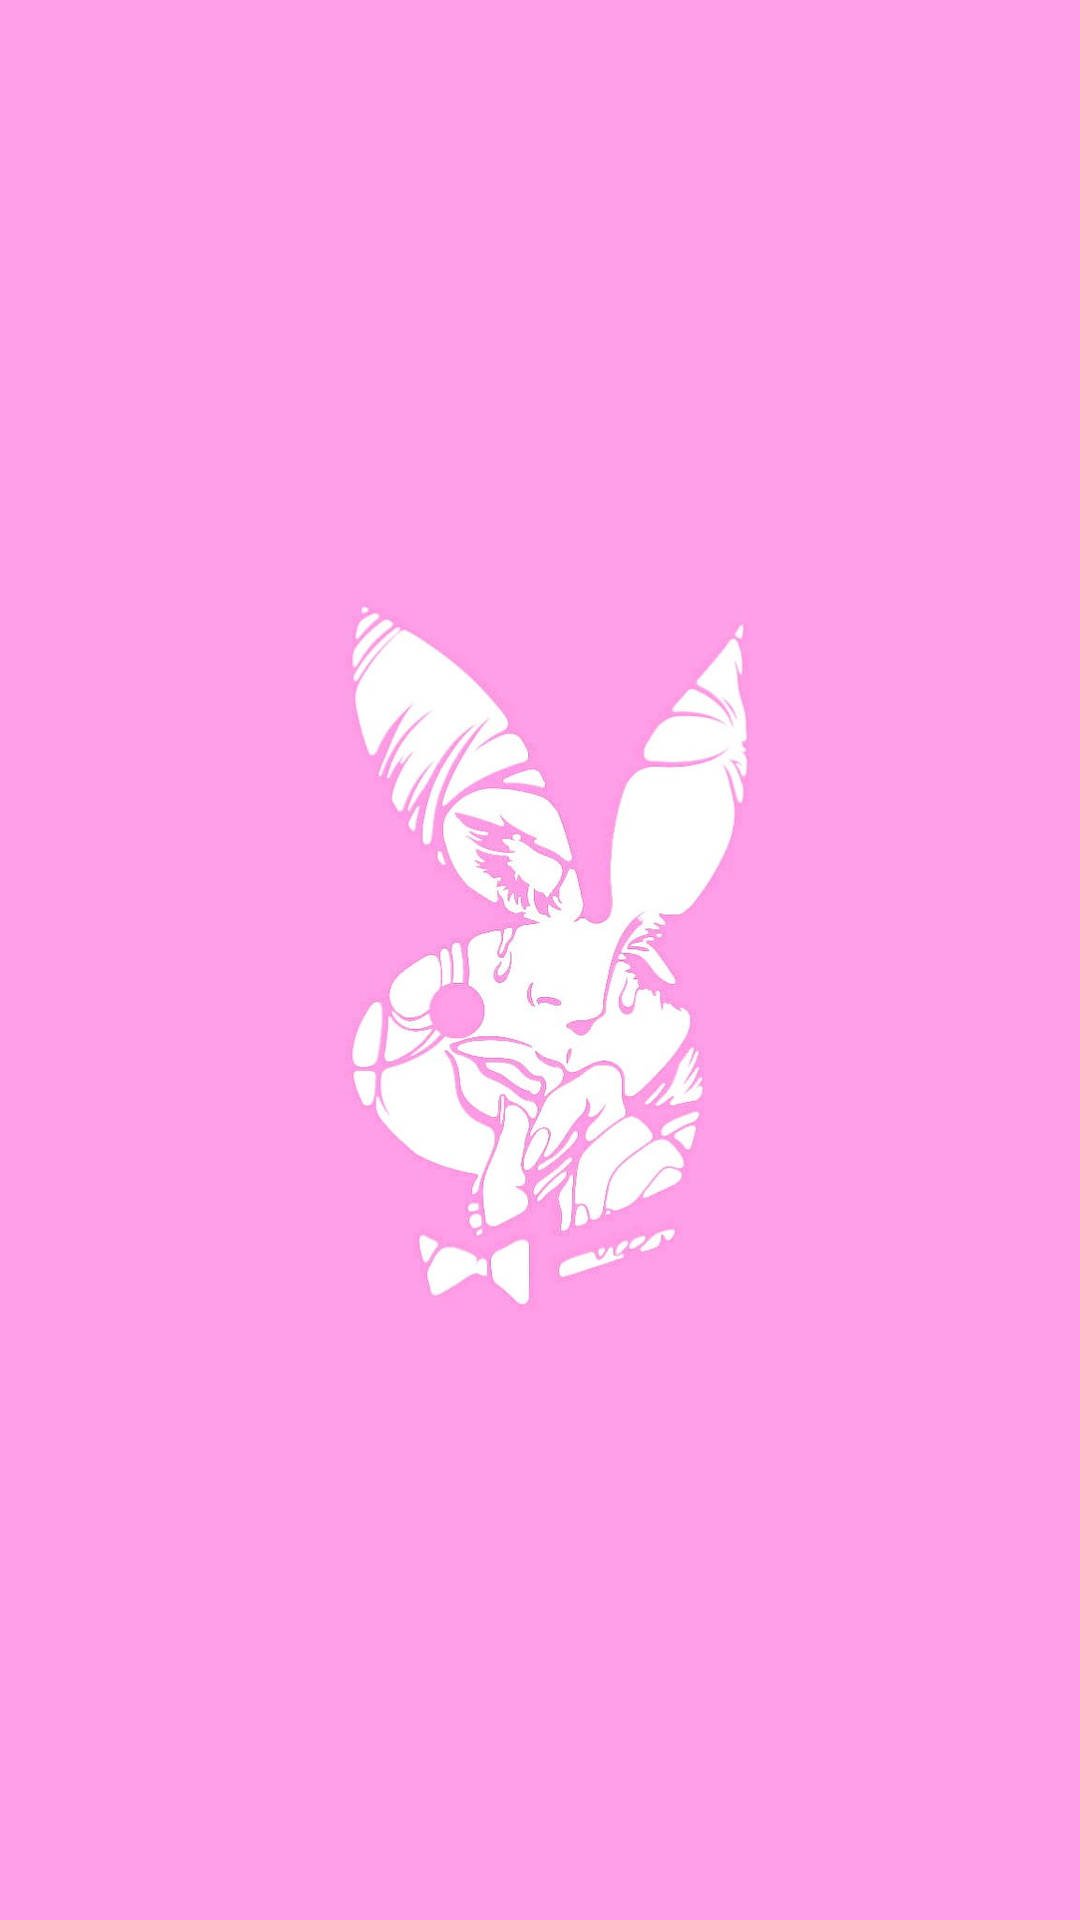 Woman Crying In Playboy Logo Background